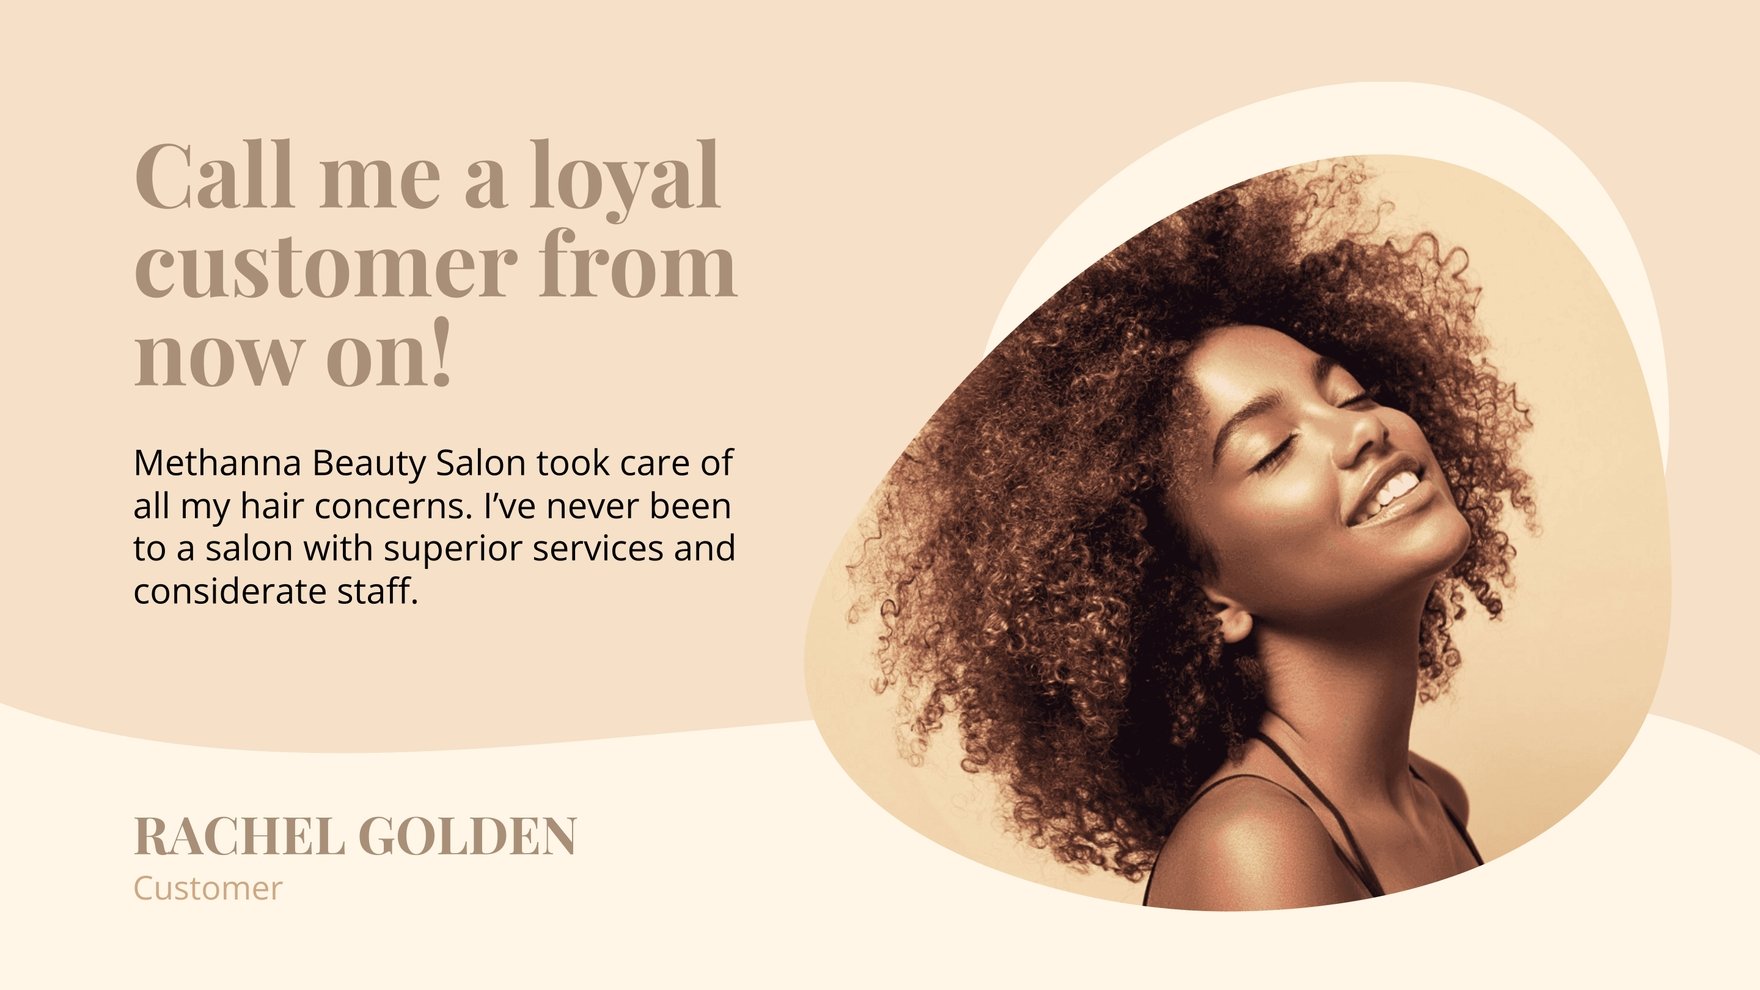 Beauty Salon Testimonial Template - Word, Apple Pages, PSD 